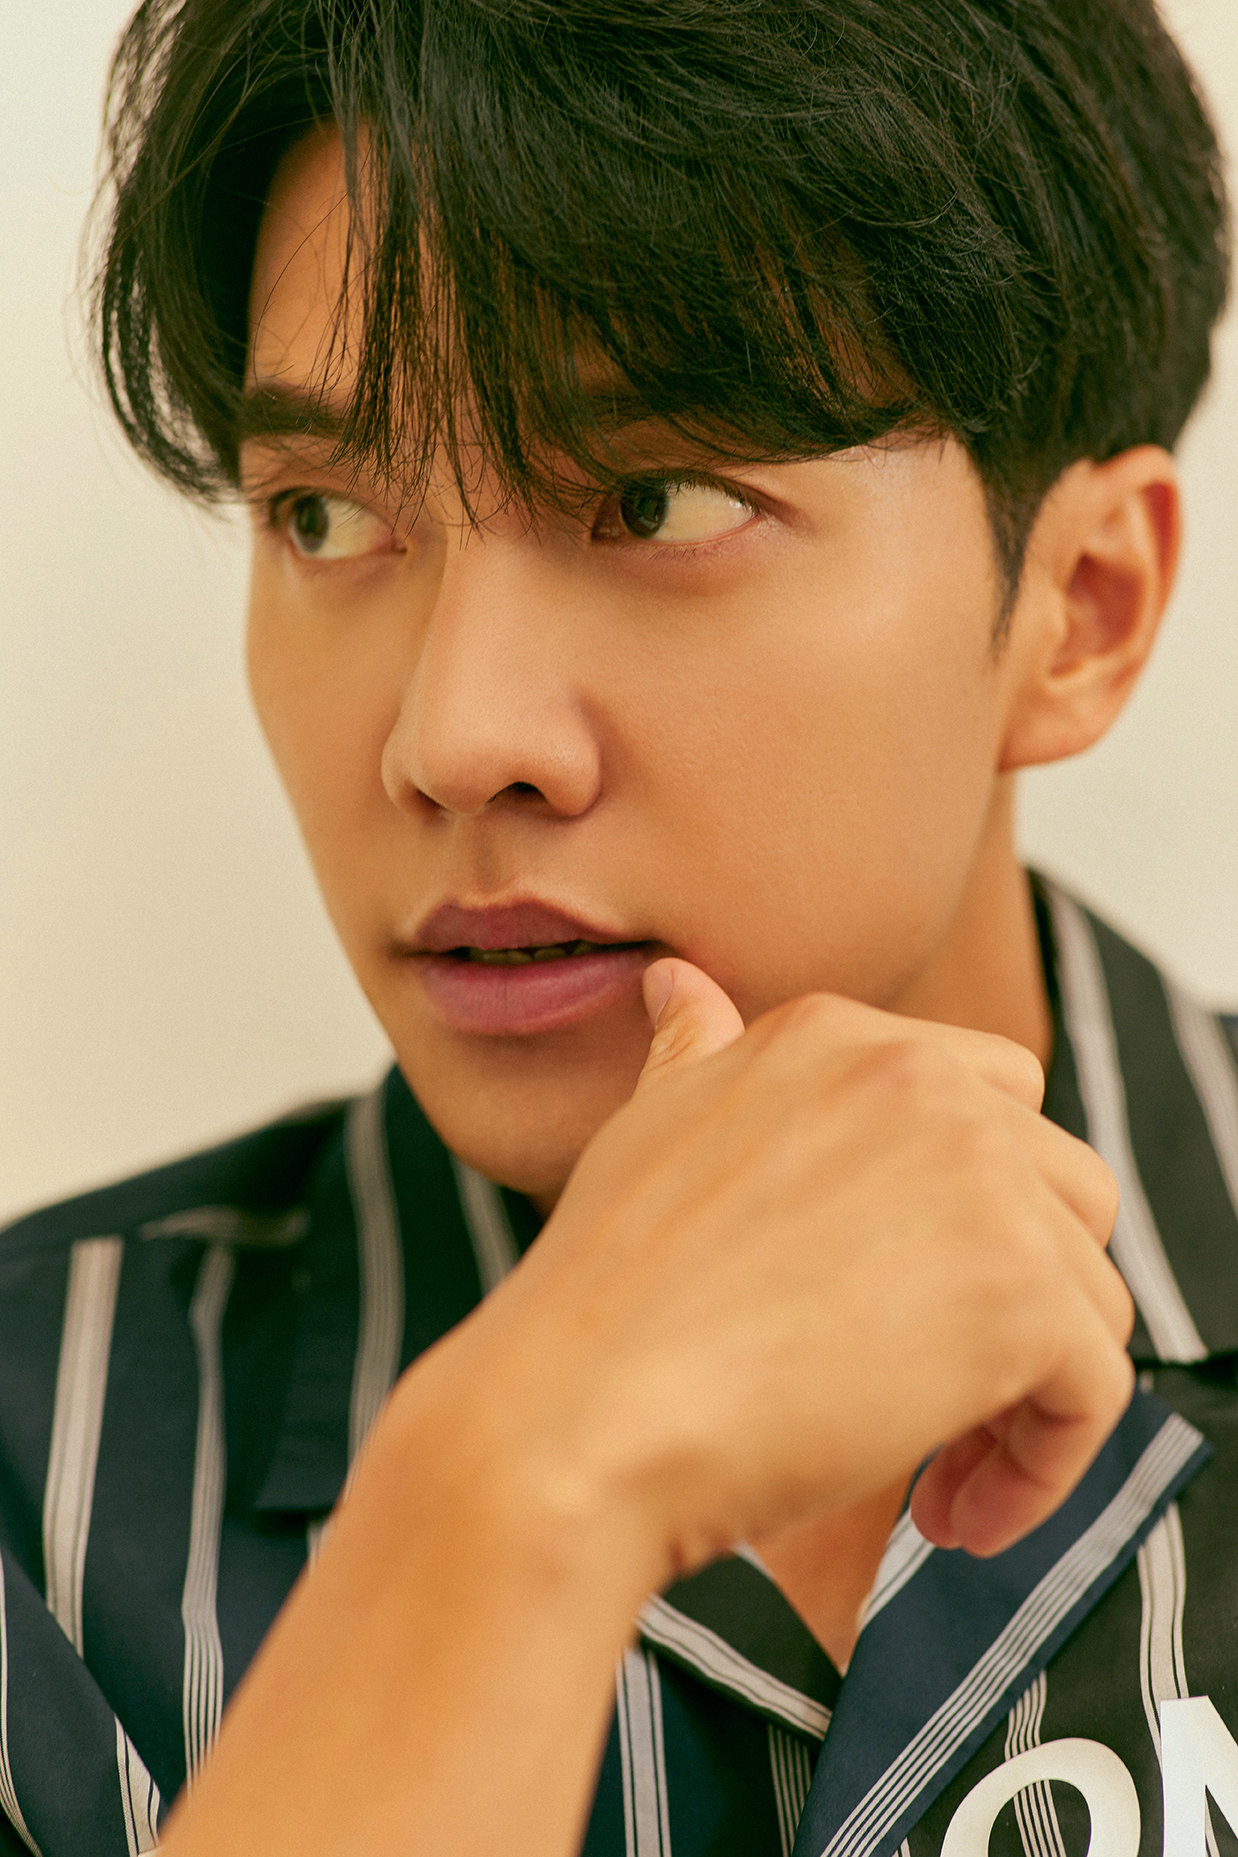 Two other stars from both languages ​​and origins have interviewed Lee Seung-gi, who appeared in the Netflix original Travel Variety Twogether, who is traveling around Asia and leaving for fans.Lee Seung-gi, who only worked as a domestic entertainer, said, It was so amazing and amazing to see the foreign media commenting on Twogether.Foreign media are asking us to recommend and stream our program, but I was wondering what part of the program was good because the culture was different and the language was different.I was surprised at the media reaction that was shown after showing my works to more than 190 countries around the world through Netflix.Lee Seung-gi, who was the first travel with Taiwans star Ryu Ho and the first variety entertainment with overseas members, said, It was like a jewel of entertainment and I was lucky to meet Ryu Ho.I had Feelings, who was a romantic and sweet man through his work, and when I actually met him, he was a person with a sense of energy and a sense of opening.It was a wonderful friend who had a very positive mind. It was an entertainment of setting that two friends with different cultures and nationalities travel to the travels with the recommended course of the fans and go to the fans house at the end. It was an entertainment that had invisible fear and excitement.When I usually entertain, I think about various things to use like insurance when it does not work well. Ryu Ho and language barriers, so I was afraid because there were Feelings with the biggest items blocked.It is entertainment, so there should be fun and speedy, but I had a lot of troubles.And I had to move around the country in time, so I was physically burdened. Lee Seung-gi talked about the worries and burdens he had before starting the program.But if you have a mind, you can cover it with body language rather than language, and it does not make sense, so you have to make a bigger reaction and its a new fun.It was a tight schedule and difficult missions, but with Ryu, I got a lot of energy and I was delighted.I told them that the positive energy of the two people was a lot of power for each other.How many points will Lee Seung-gis self-score for a month of travel with Ryu Iho? I want to give 120 points.I want to give more than I expected because I have tasted the change of Travel, which was fearful and worried, into joy, joy and joy.Travel was also fun, but I would like to give 120 points because I will receive another impression of visiting fans at the end. It is Lee Seung-gi who works really hard regardless of domestic entertainment, drama, and global entertainment.Asked if it was hard, he answered without hesitation, Its hard, but I have the energy that gets through my work, so I work harder.I have to recharge while resting, but it seems to be stressful and energy to be immersed and evaluated while continuing the project. Lee Seung-gi must be Walkerholic.As a person who is always in a position to be evaluated, it is a challenge and a challenge to continue to show what to show in the future, and to keep giving energy like this now.My dream is to work hard as long as I can do it for a long time as I can. Through the words, I looked at the will of Lee Seung-gis infinite power.iMBC • Photos